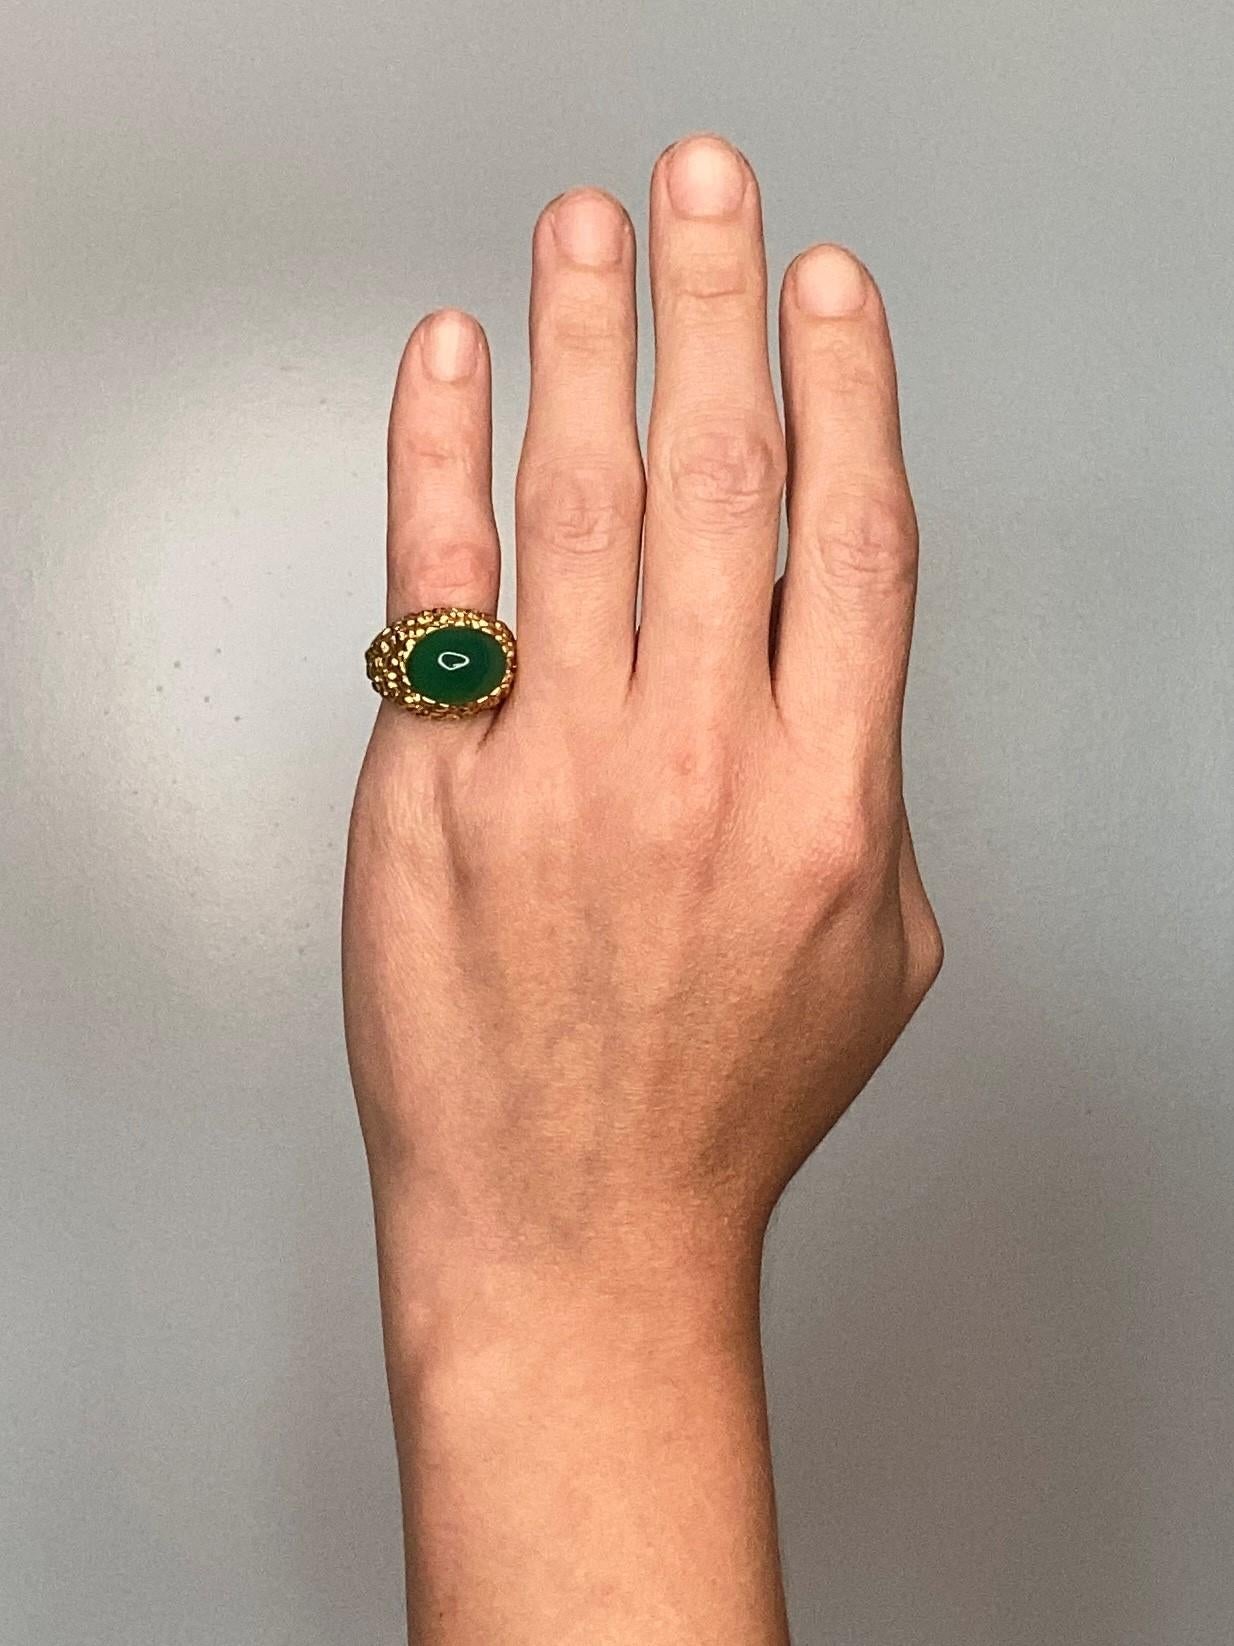 Cabochon Van Cleef & Arpels 1970 Paris Cocktail Ring 18kt Gold with 8.27 Cts Chrysoprase